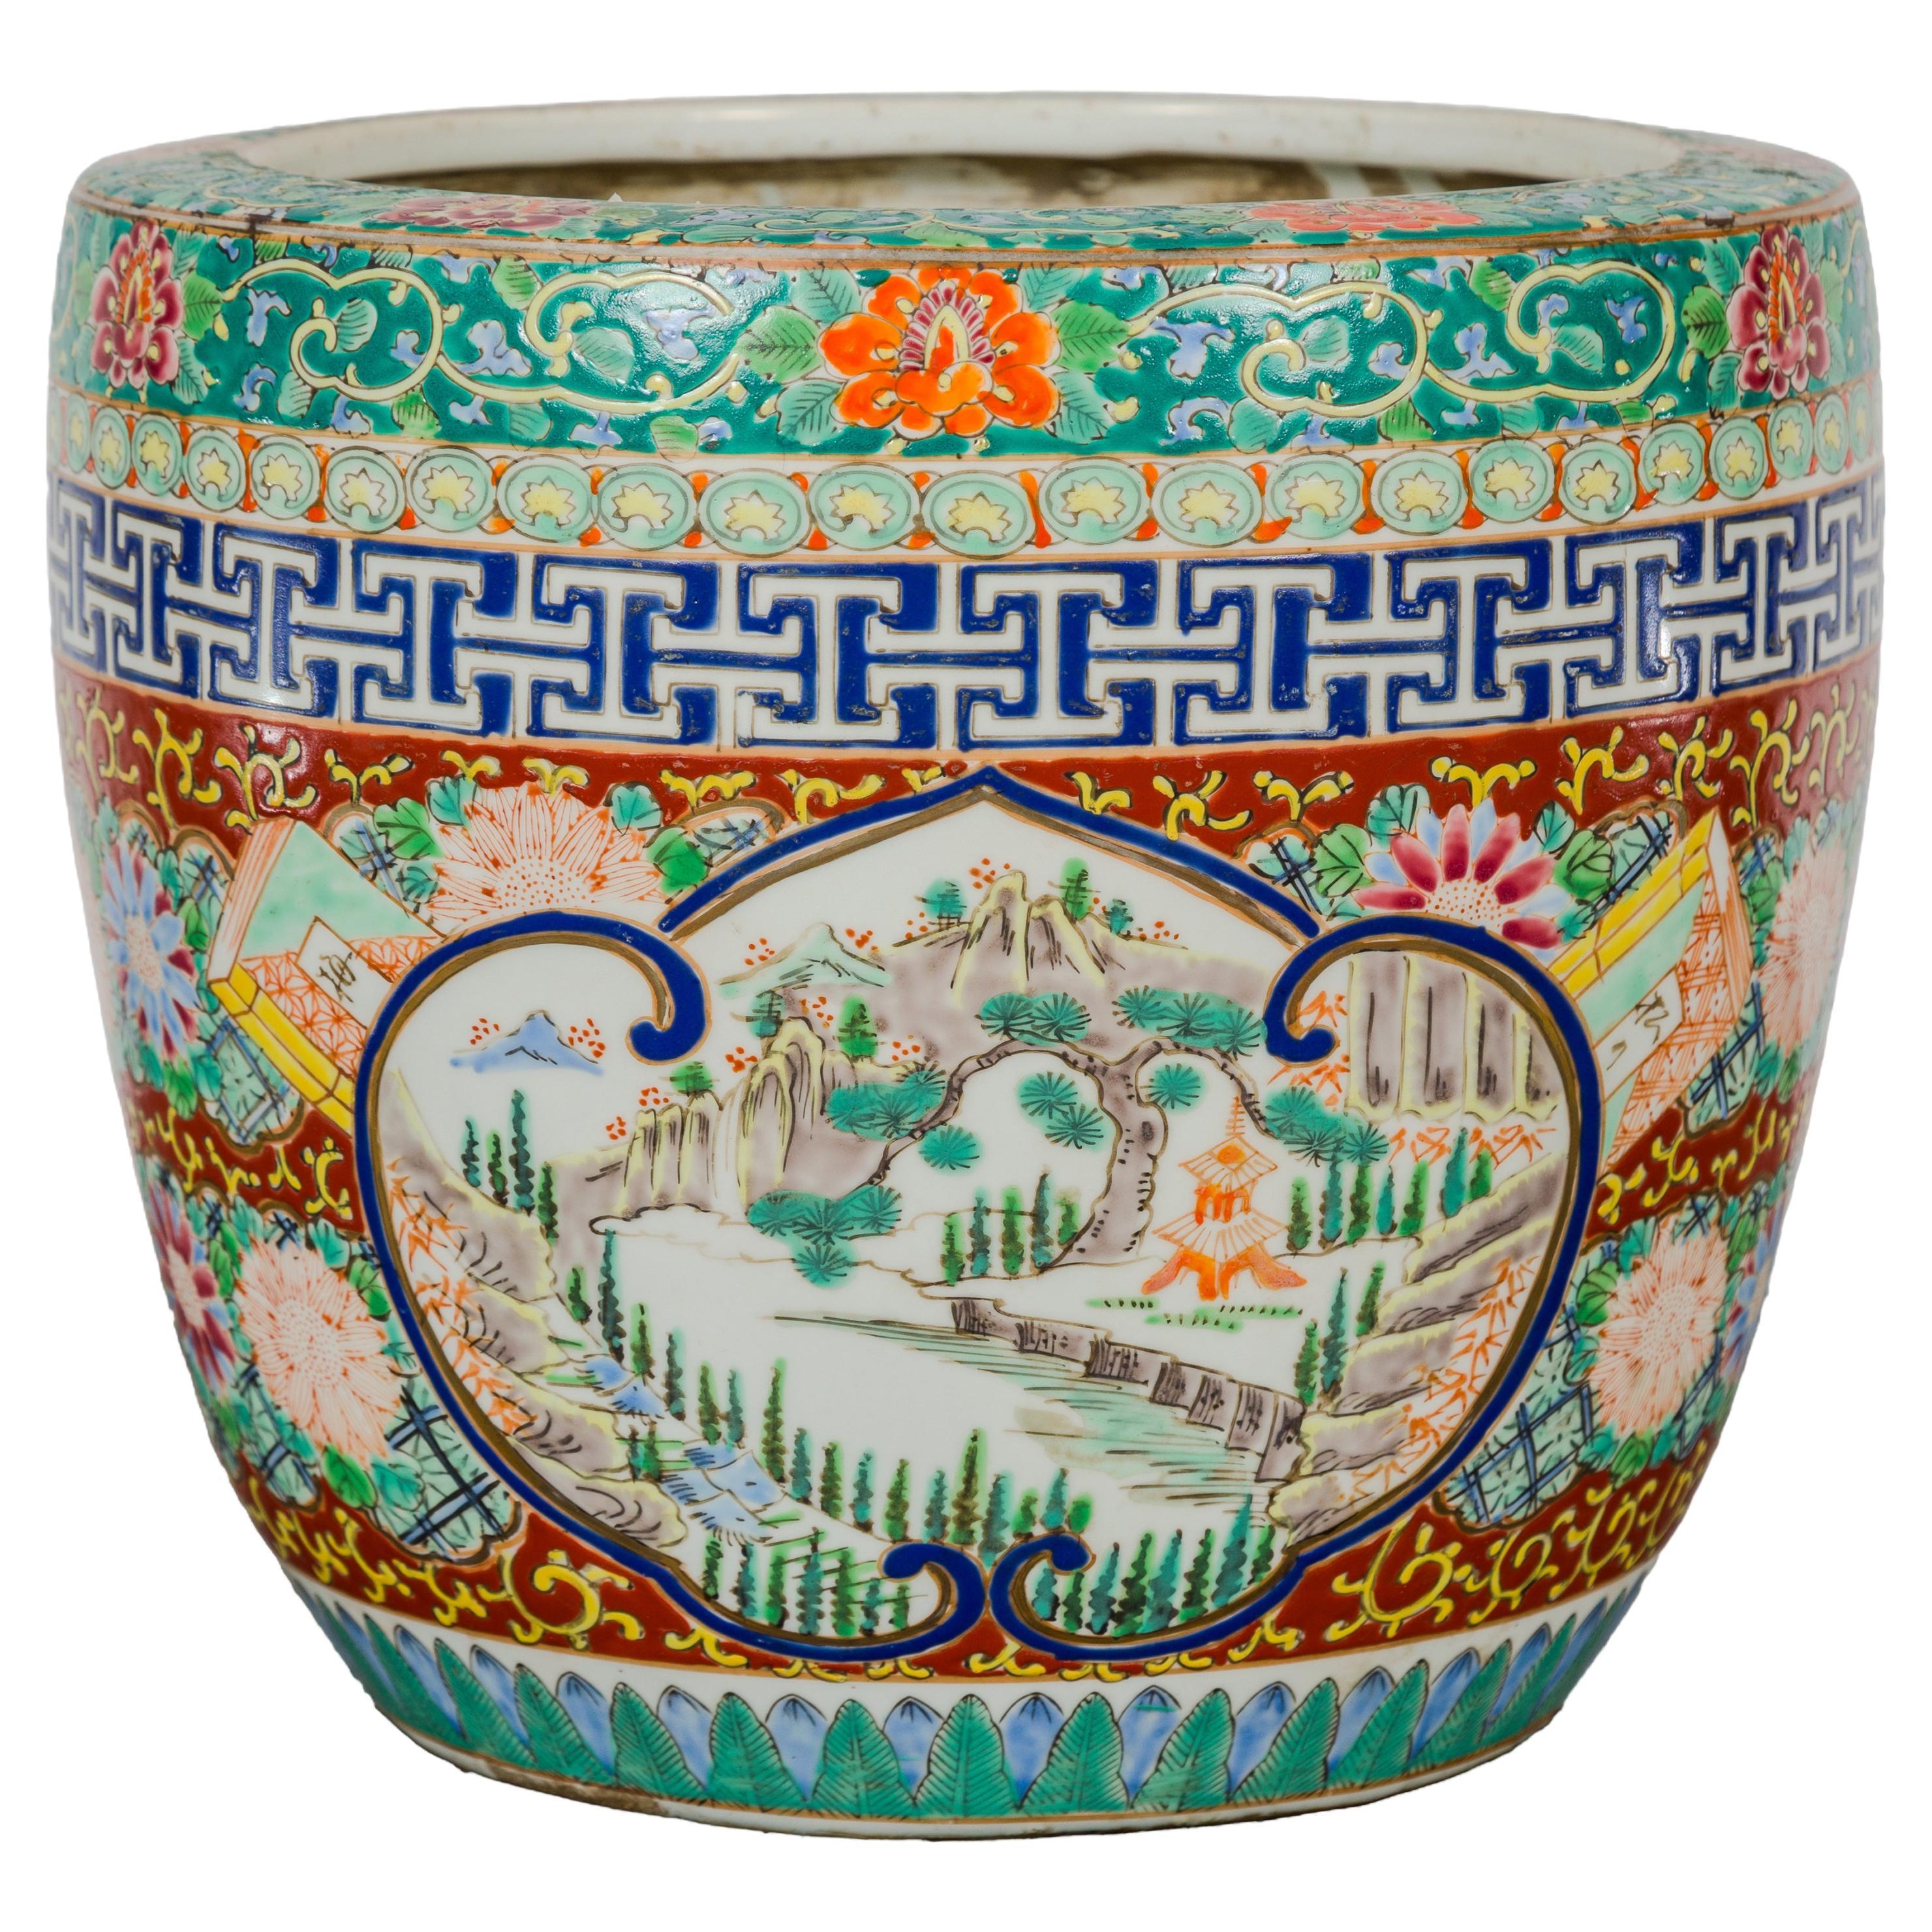 Japanese Hand-Painted Imari Planter with Landscapes, Flowers and Books For Sale